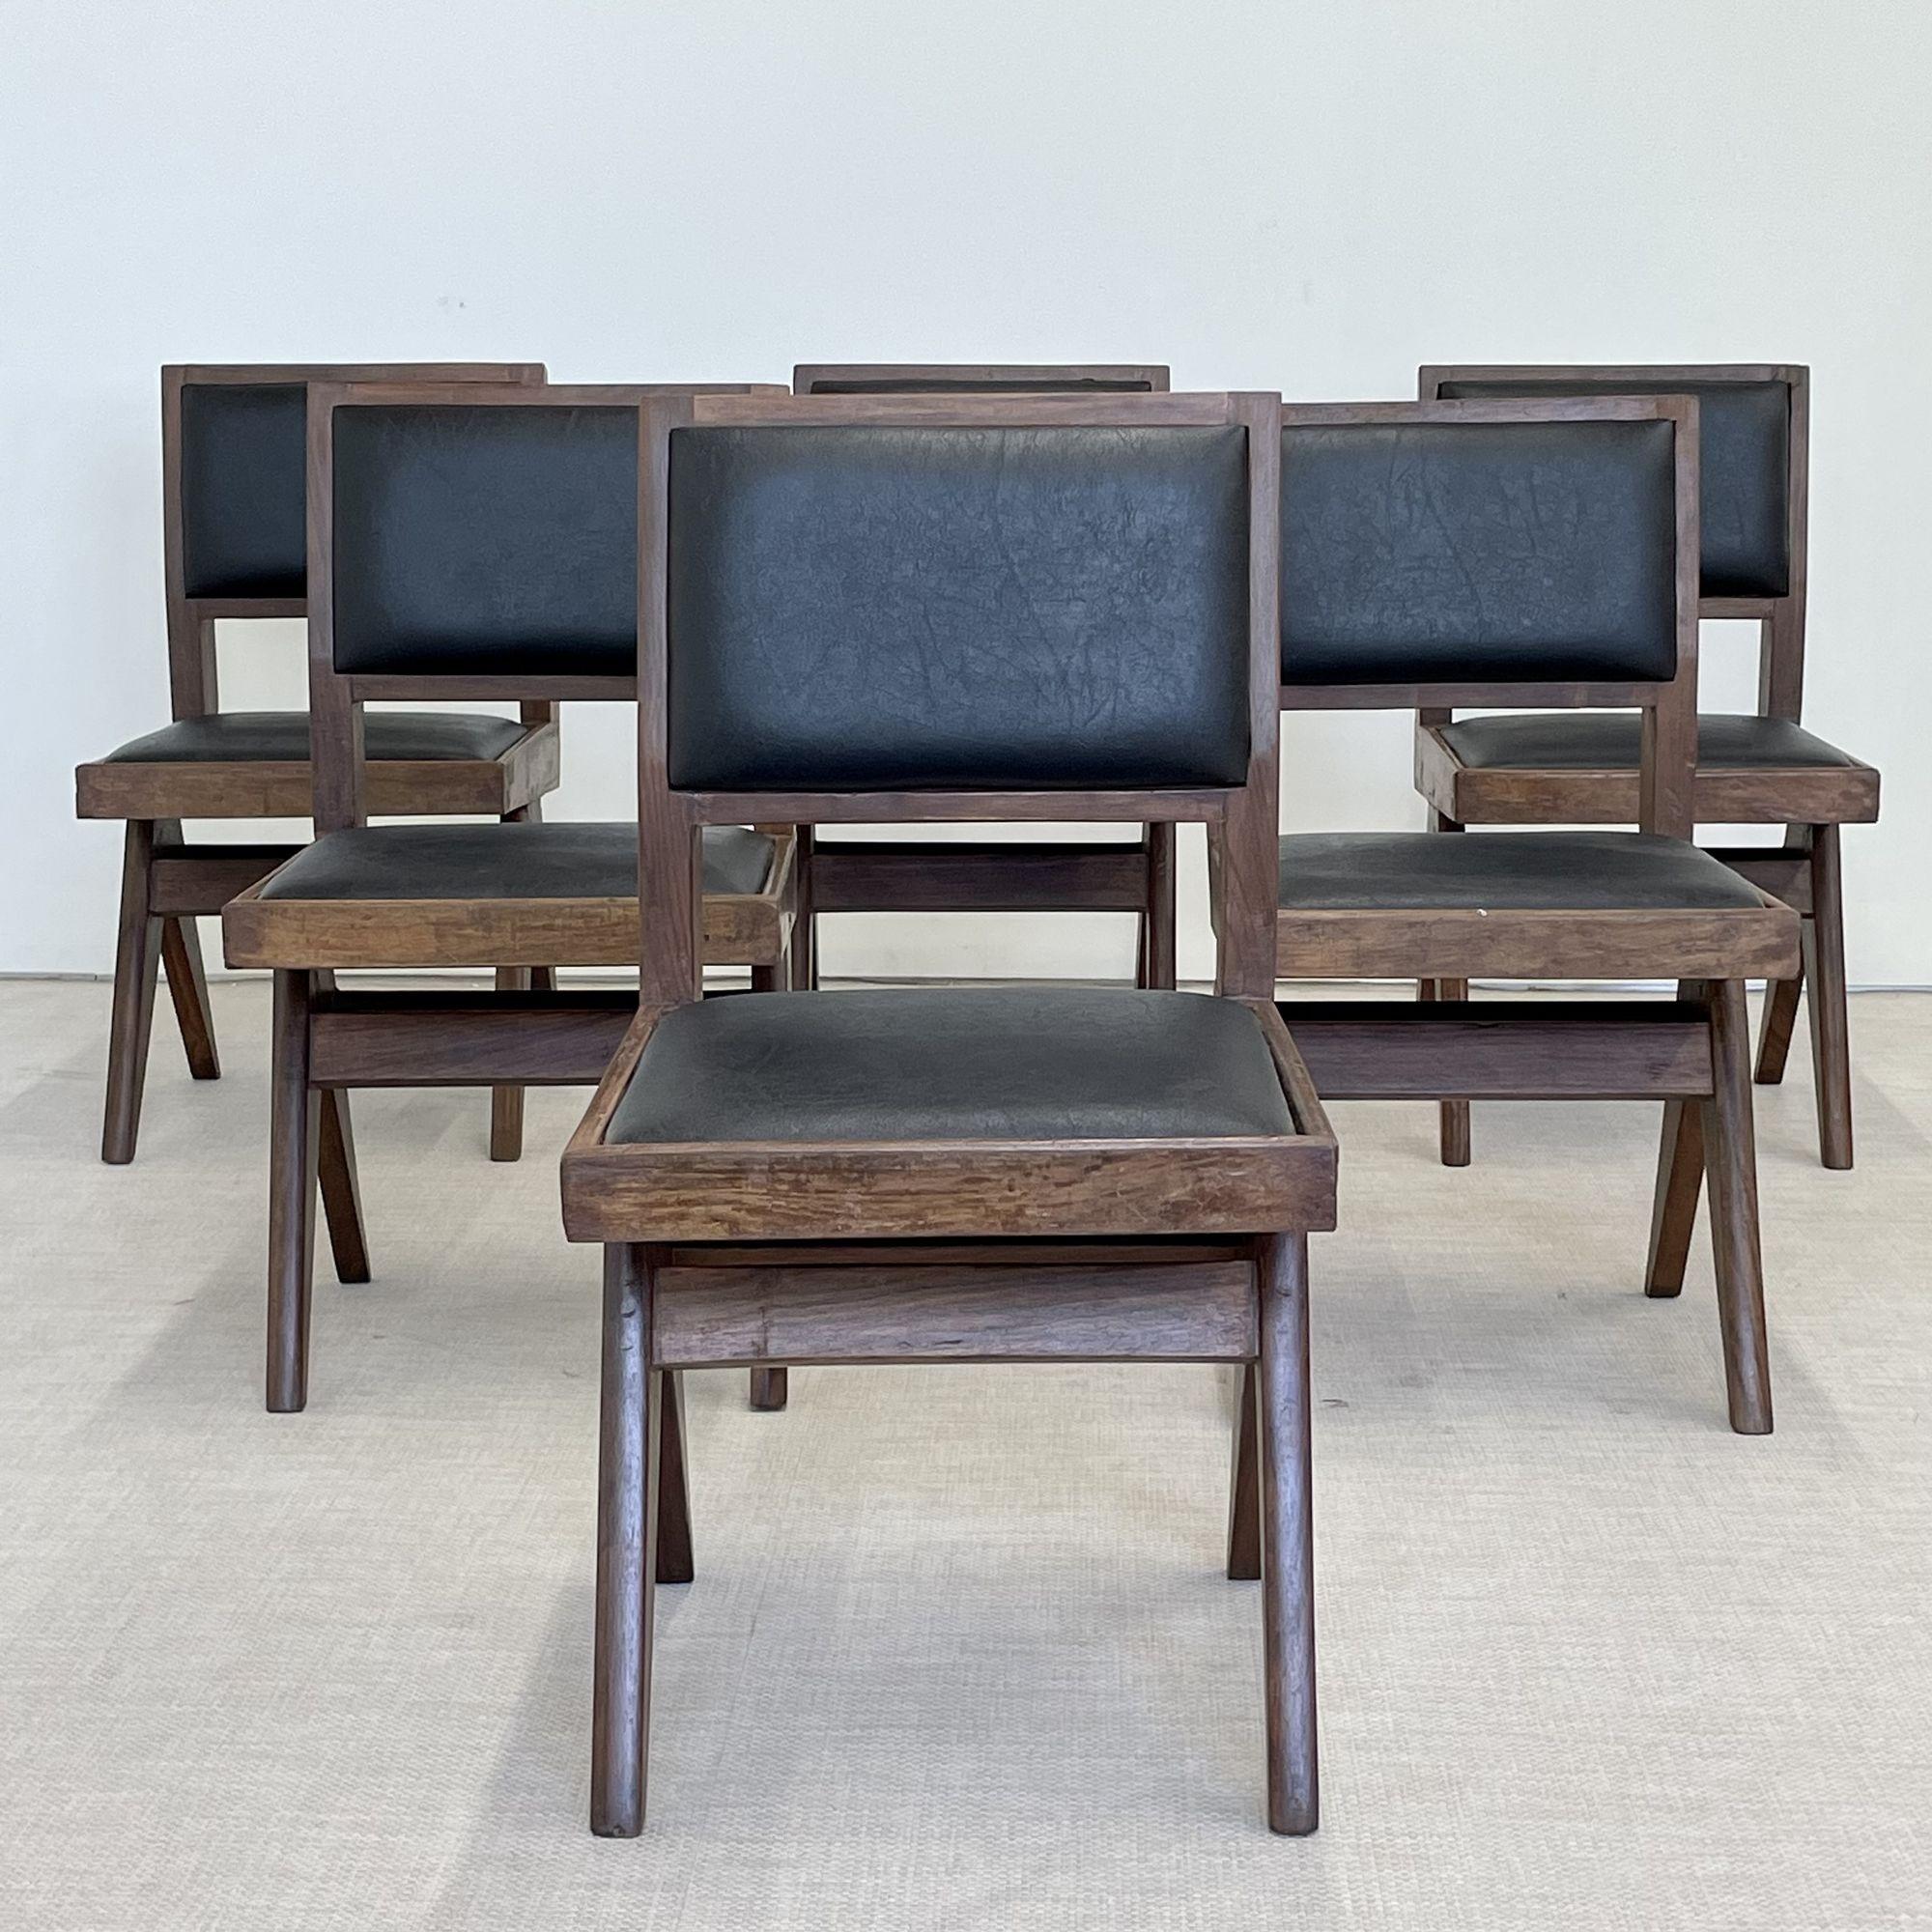 Pierre Jeanneret, French Mid-Century Modern, Six Dining Chairs, Teak, Chandigarh

Set of six Pierre Jeanneret armless upholstered dining chairs, Model PJ-SI-25-E. Rare set of six upholstered dining chairs having a compass type double side leg